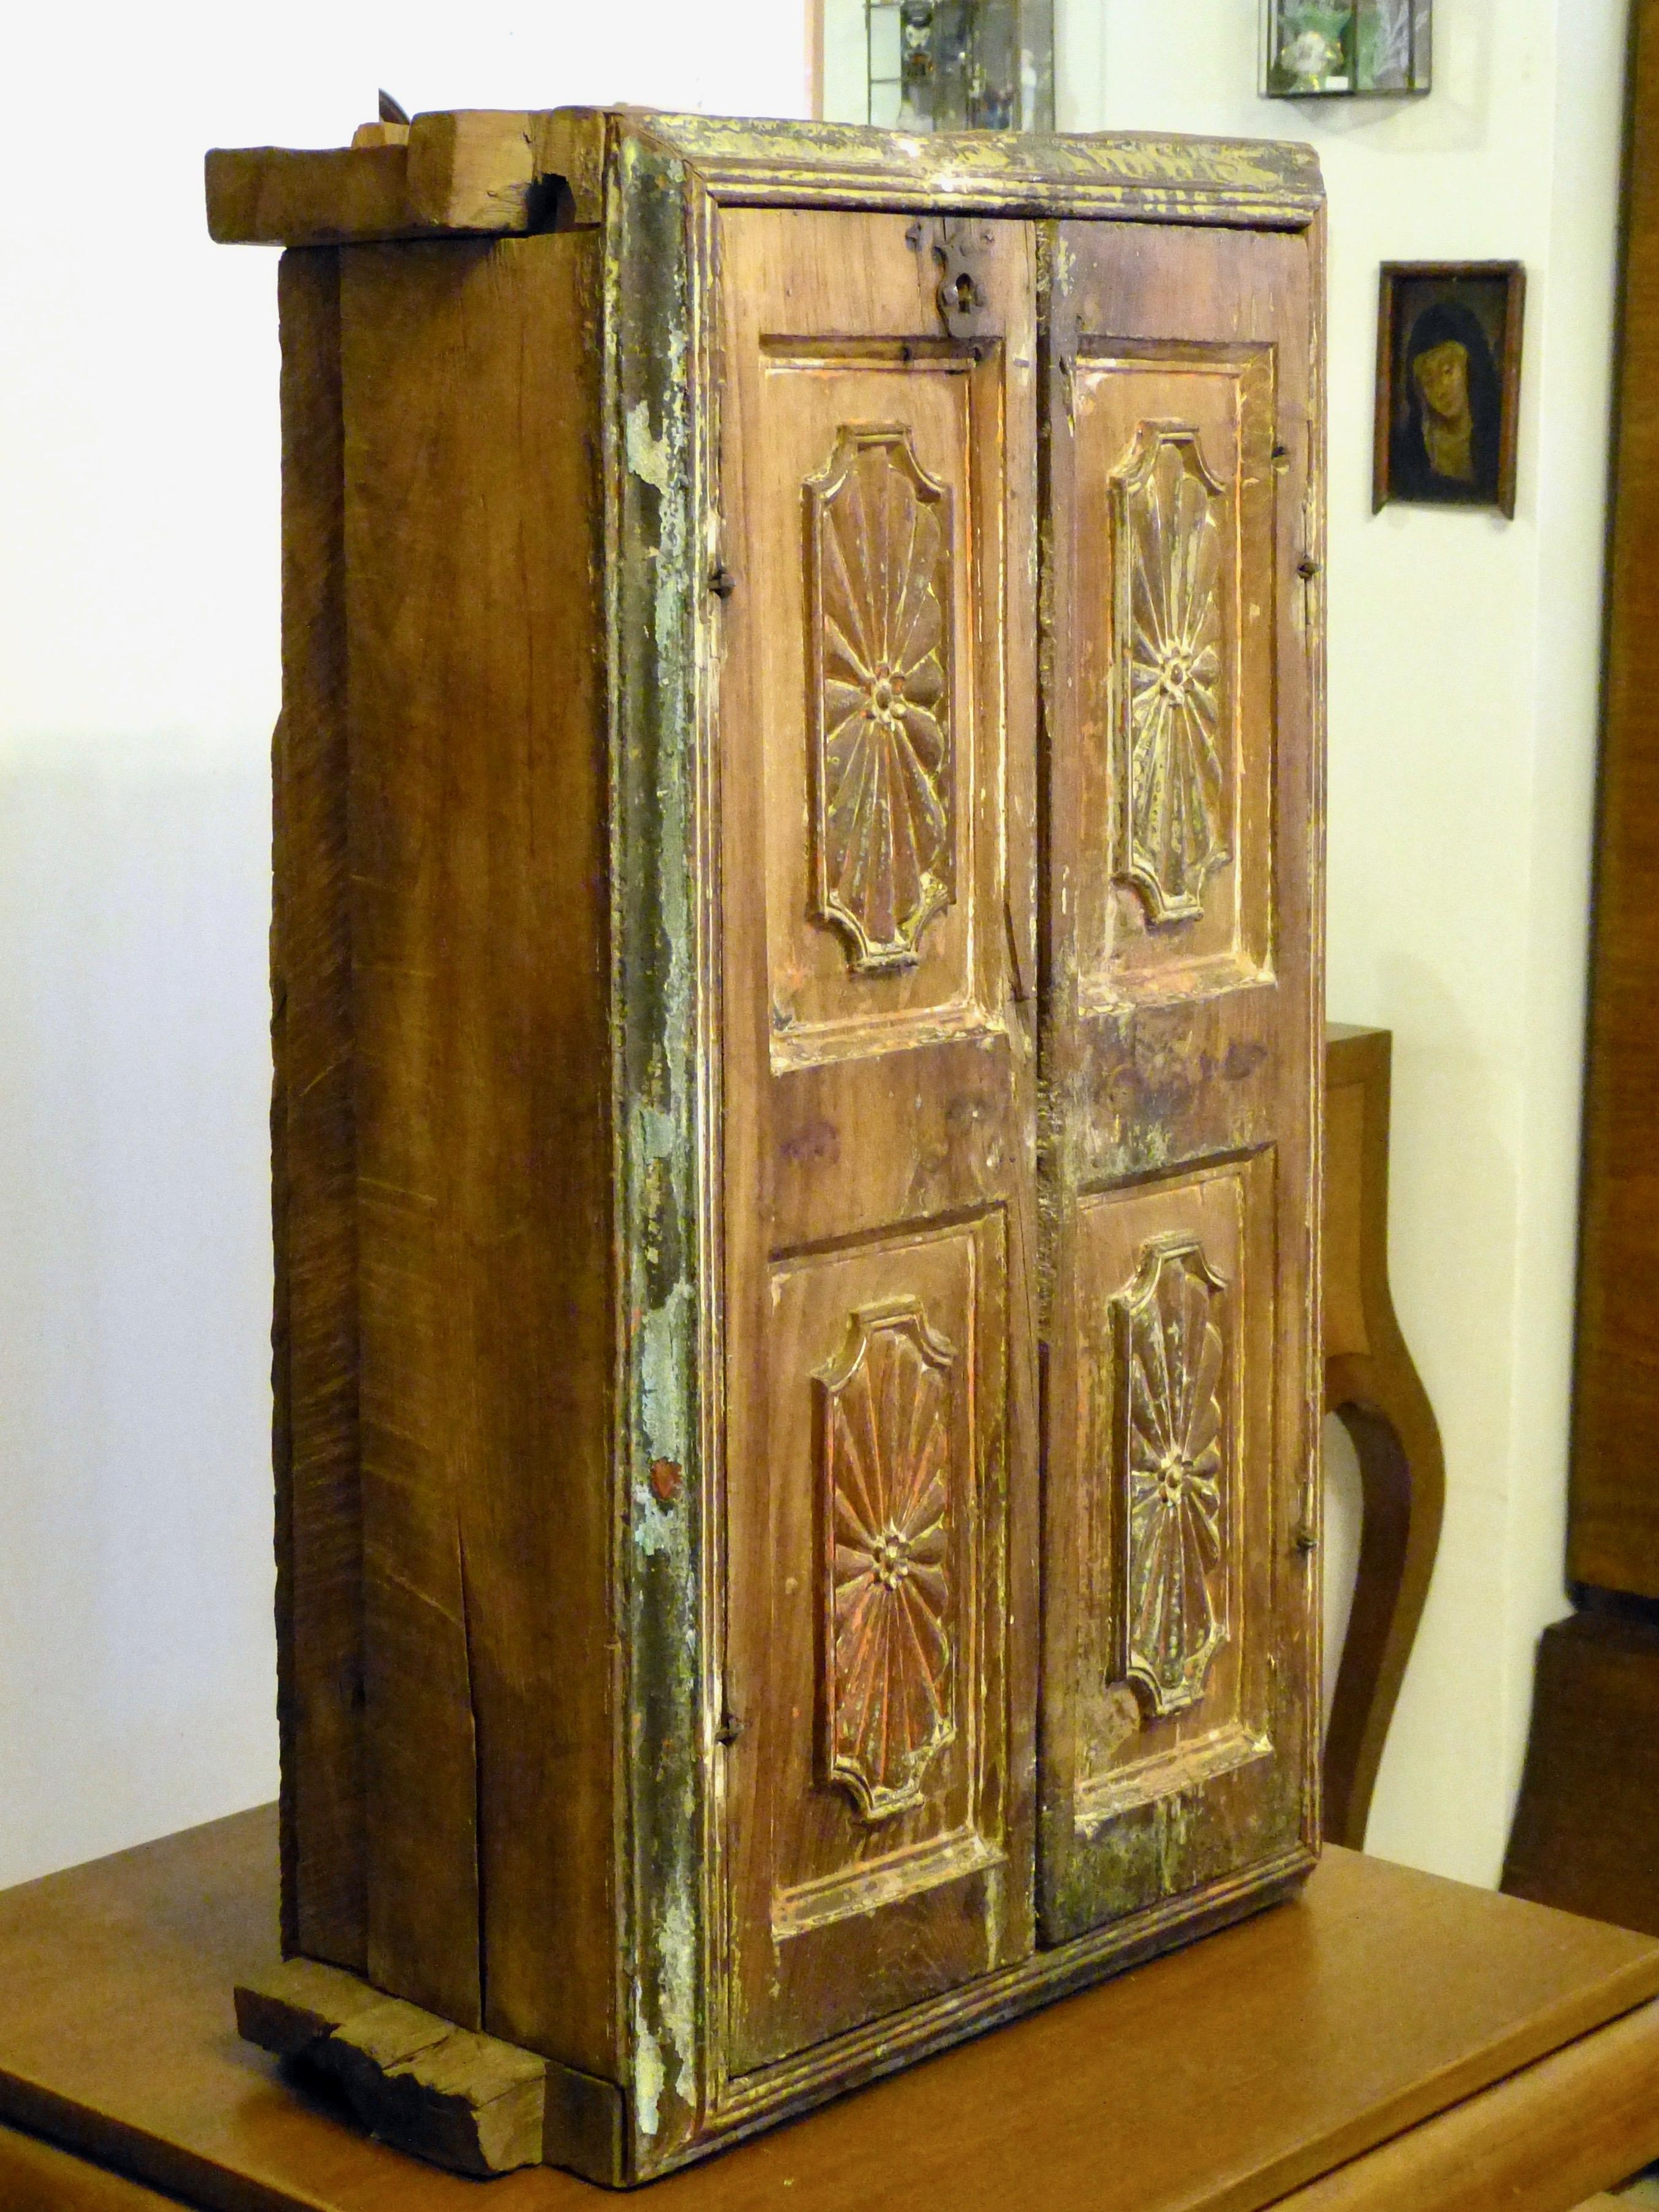 Antique colonial wood wall cabinet
Made from Ayacahuite wood with forged ironworks
Puebla, México, 18th century
Very heavy, hangs on wall.